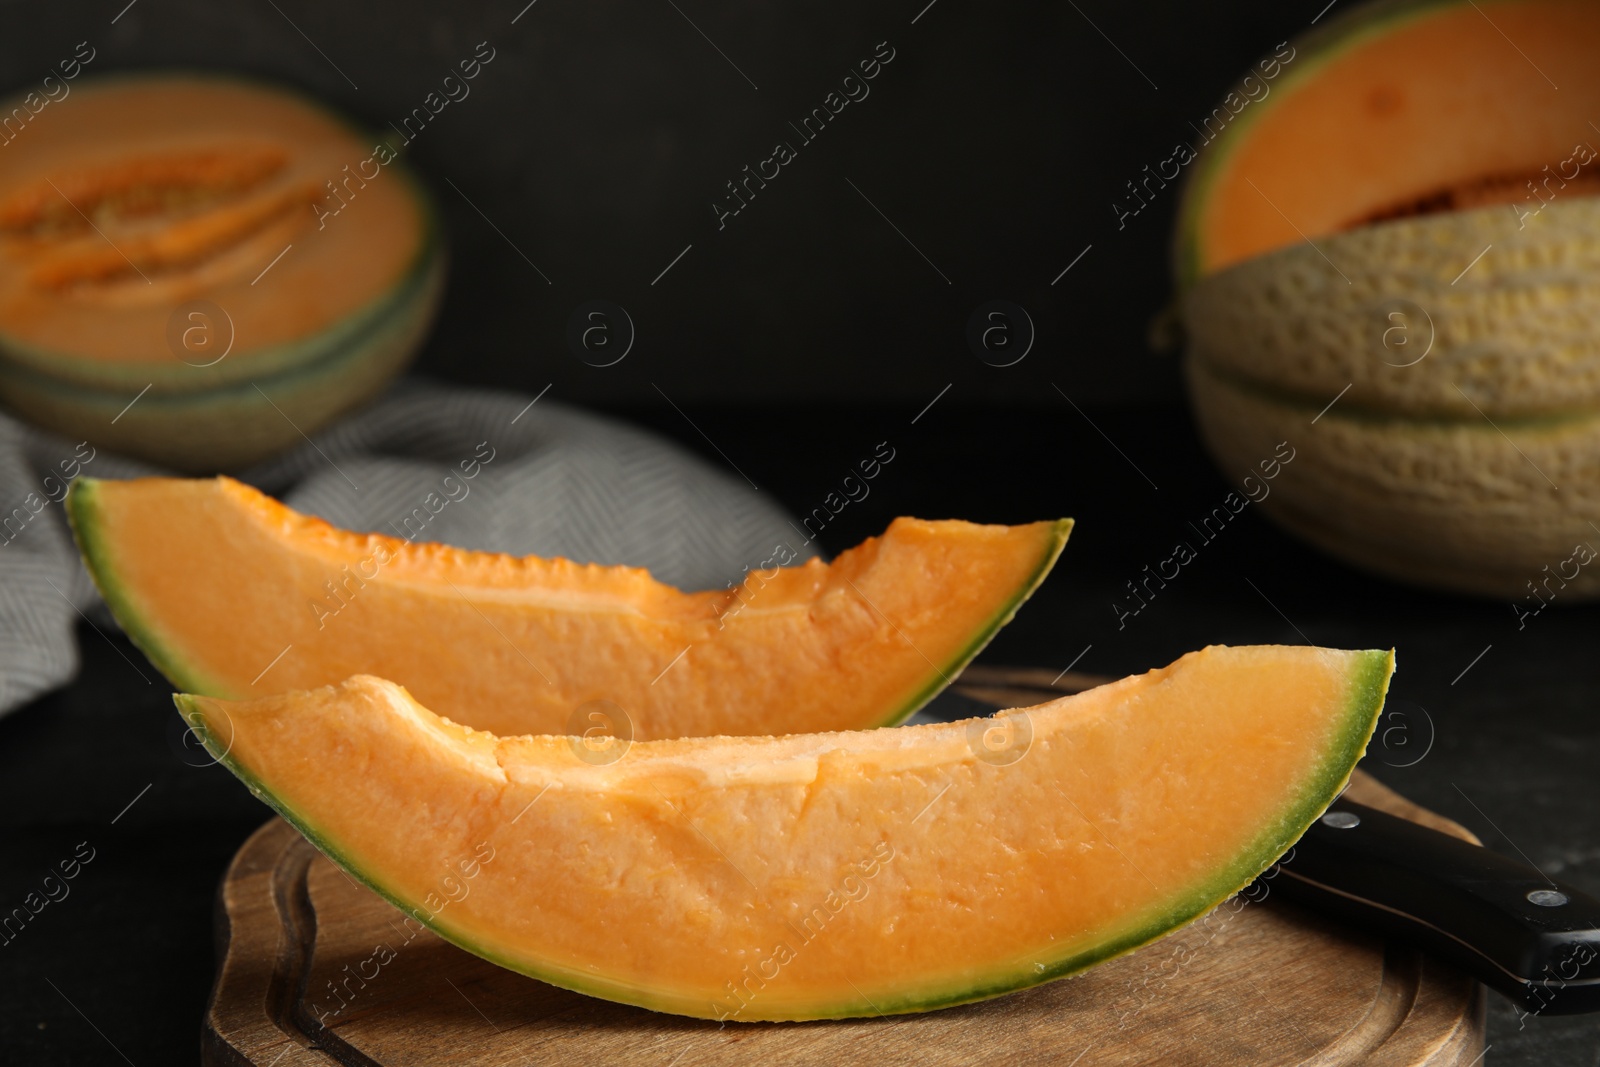 Photo of Slices of tasty fresh melon on wooden board, closeup